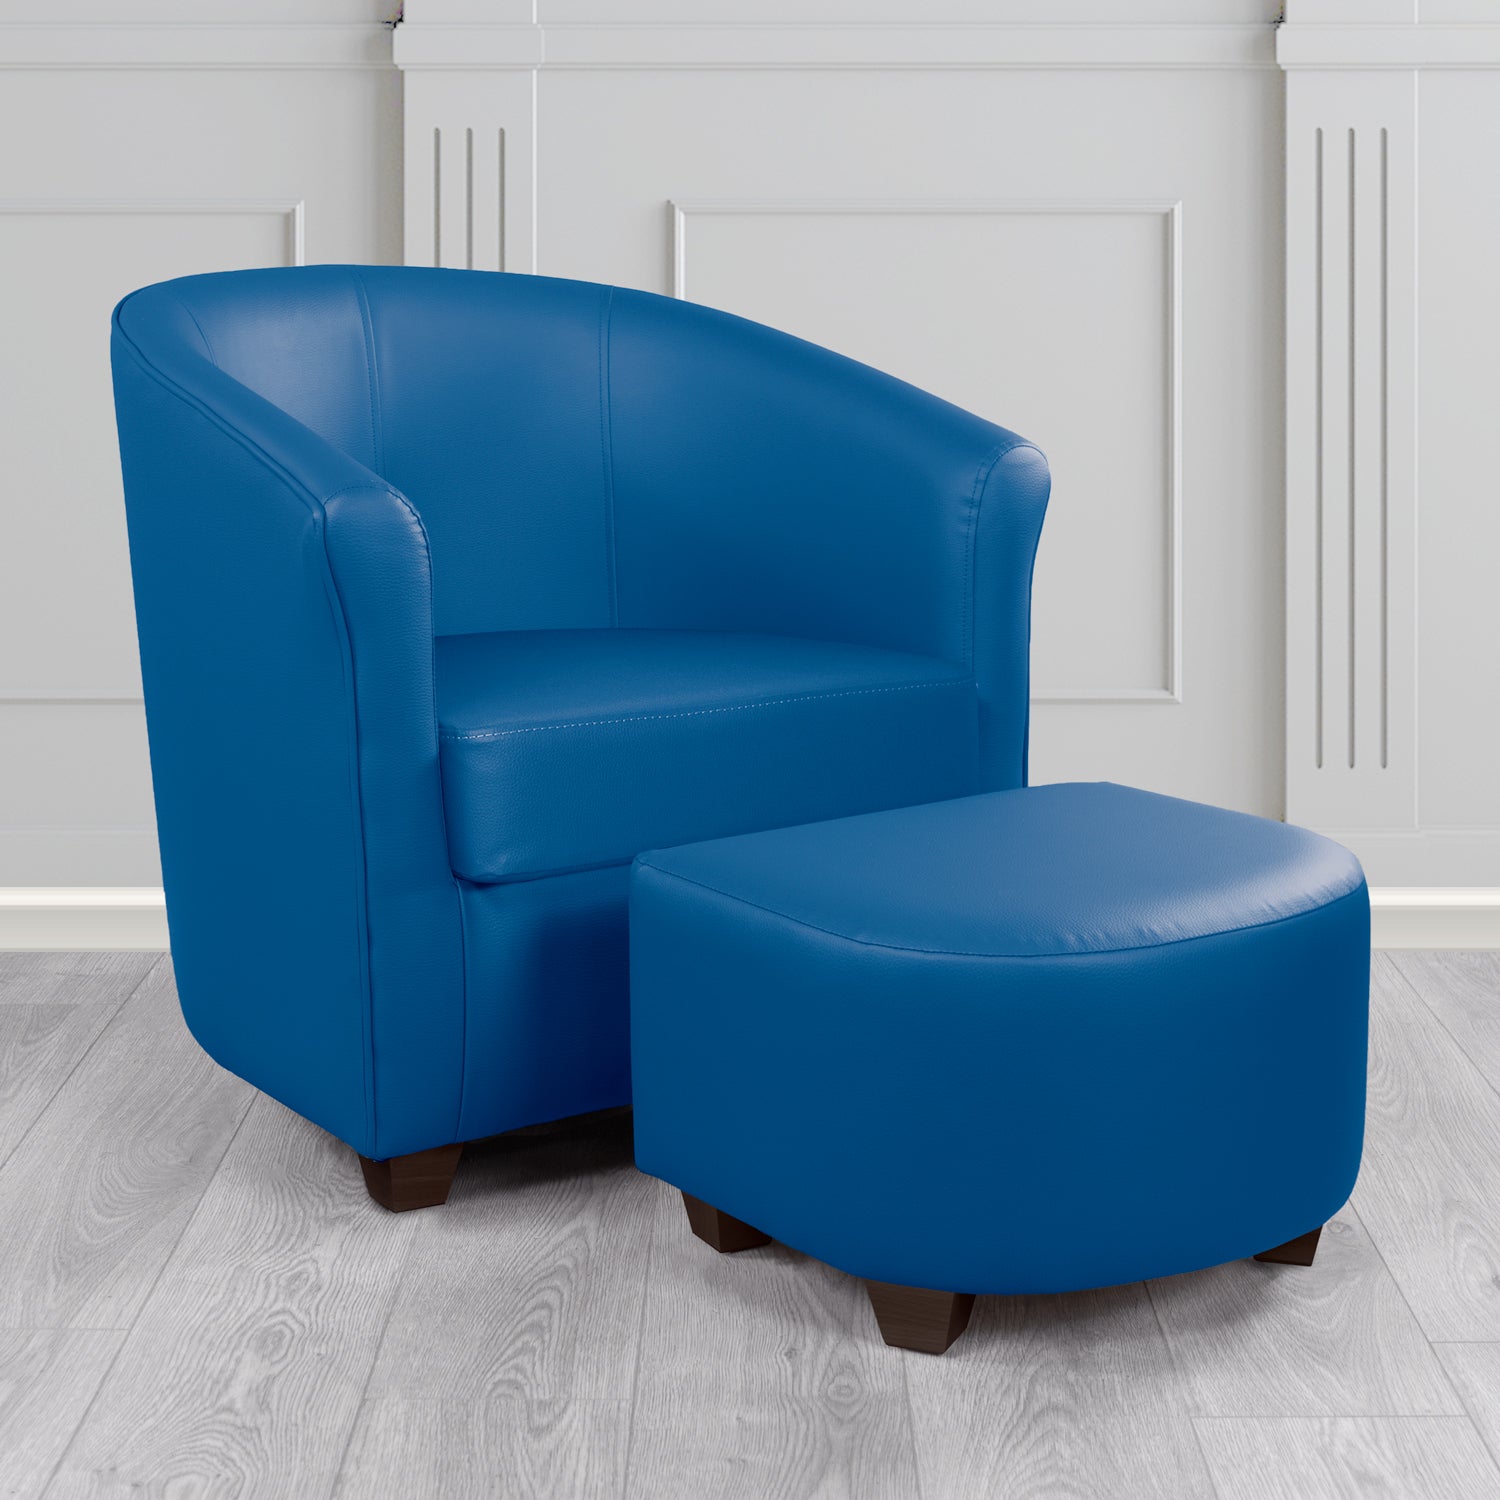 Cannes Tub Chair with Footstool Set in Just Colour Ocean Blue Crib 5 Faux Leather - The Tub Chair Shop